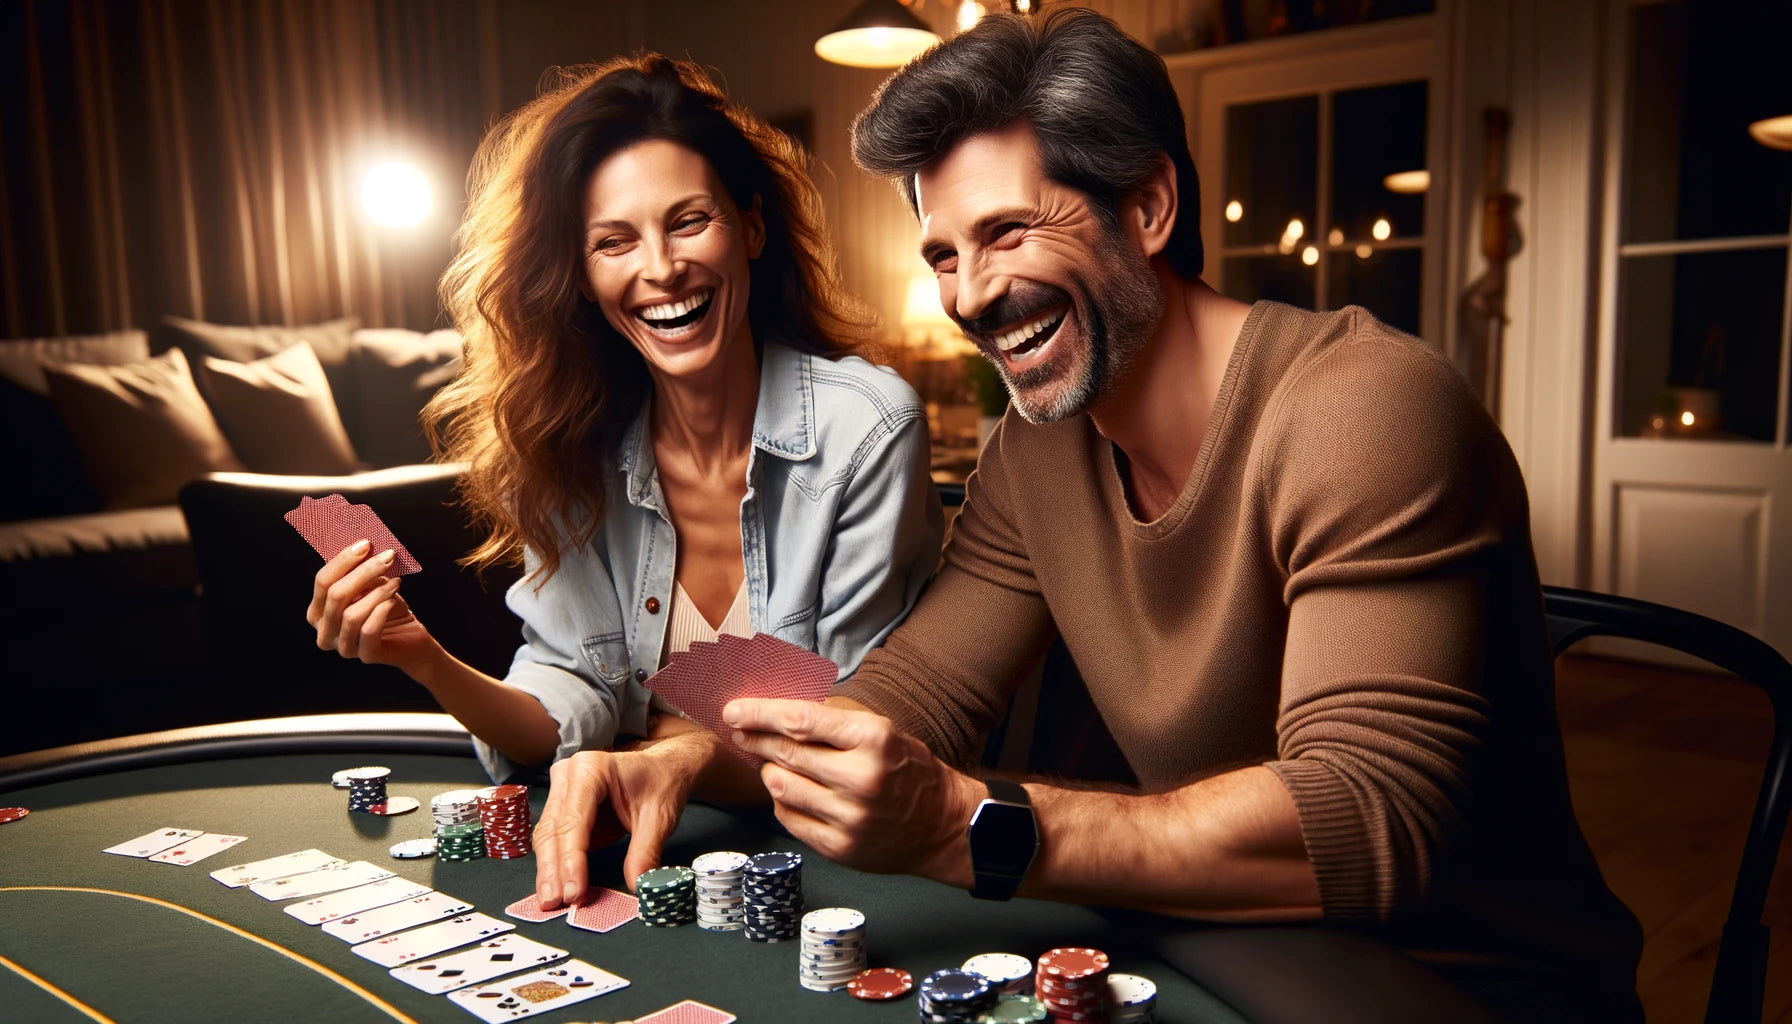 Can Poker Be Played Between 2 People?